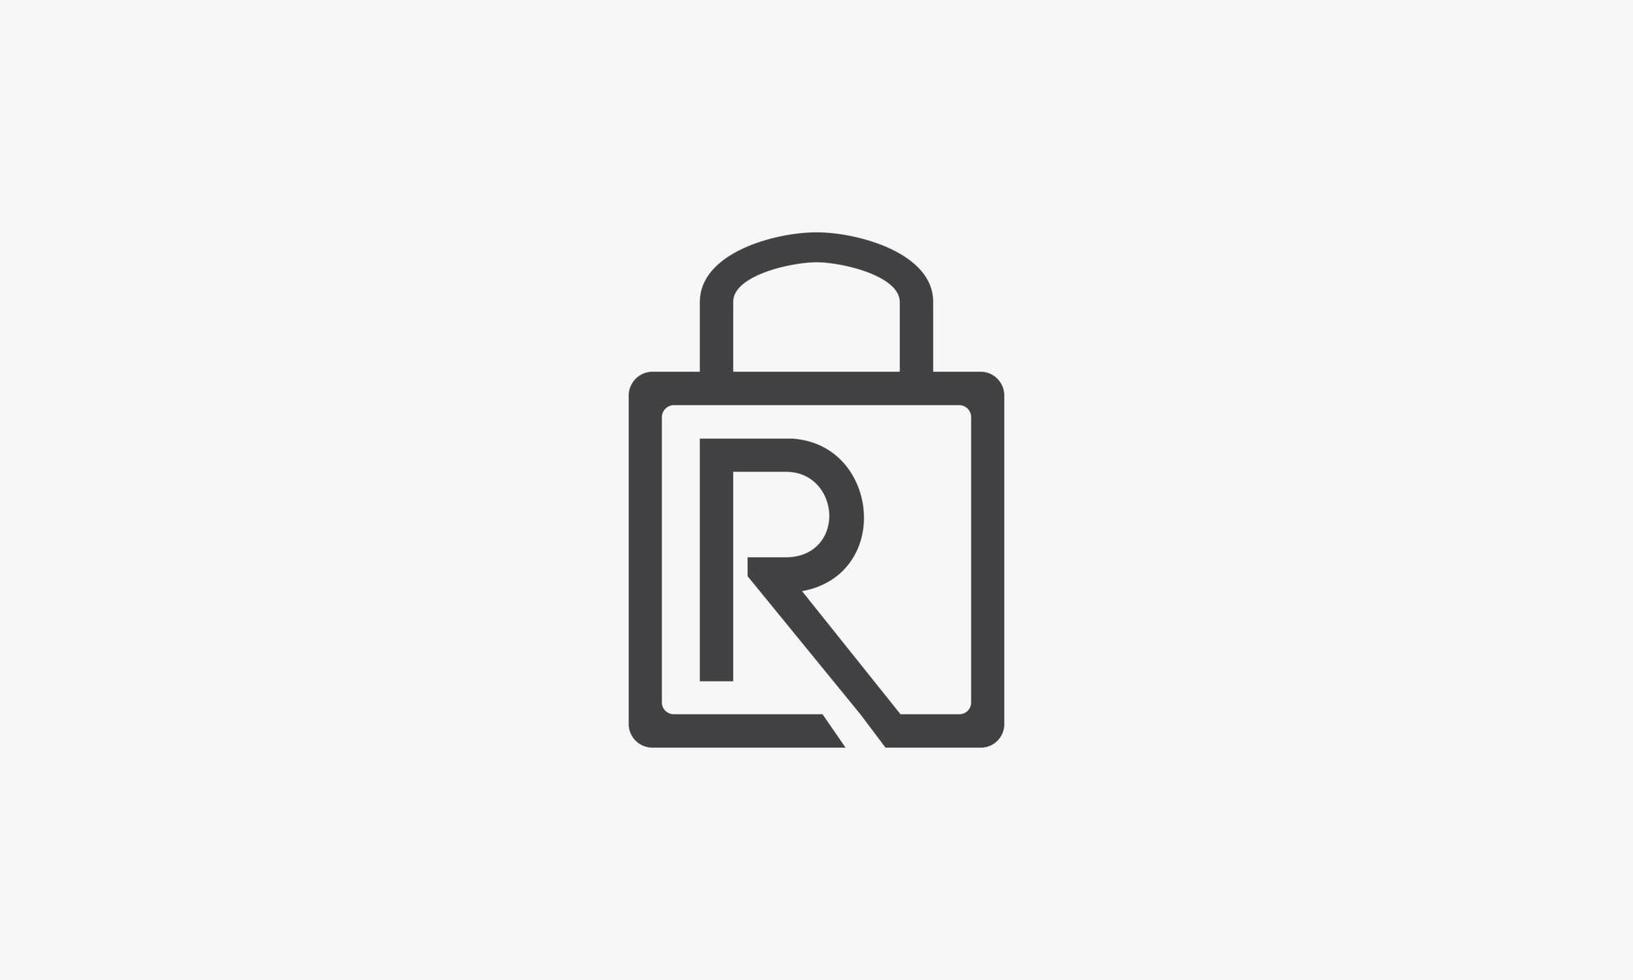 R letter logo shopping bag concept isolated on white background. vector